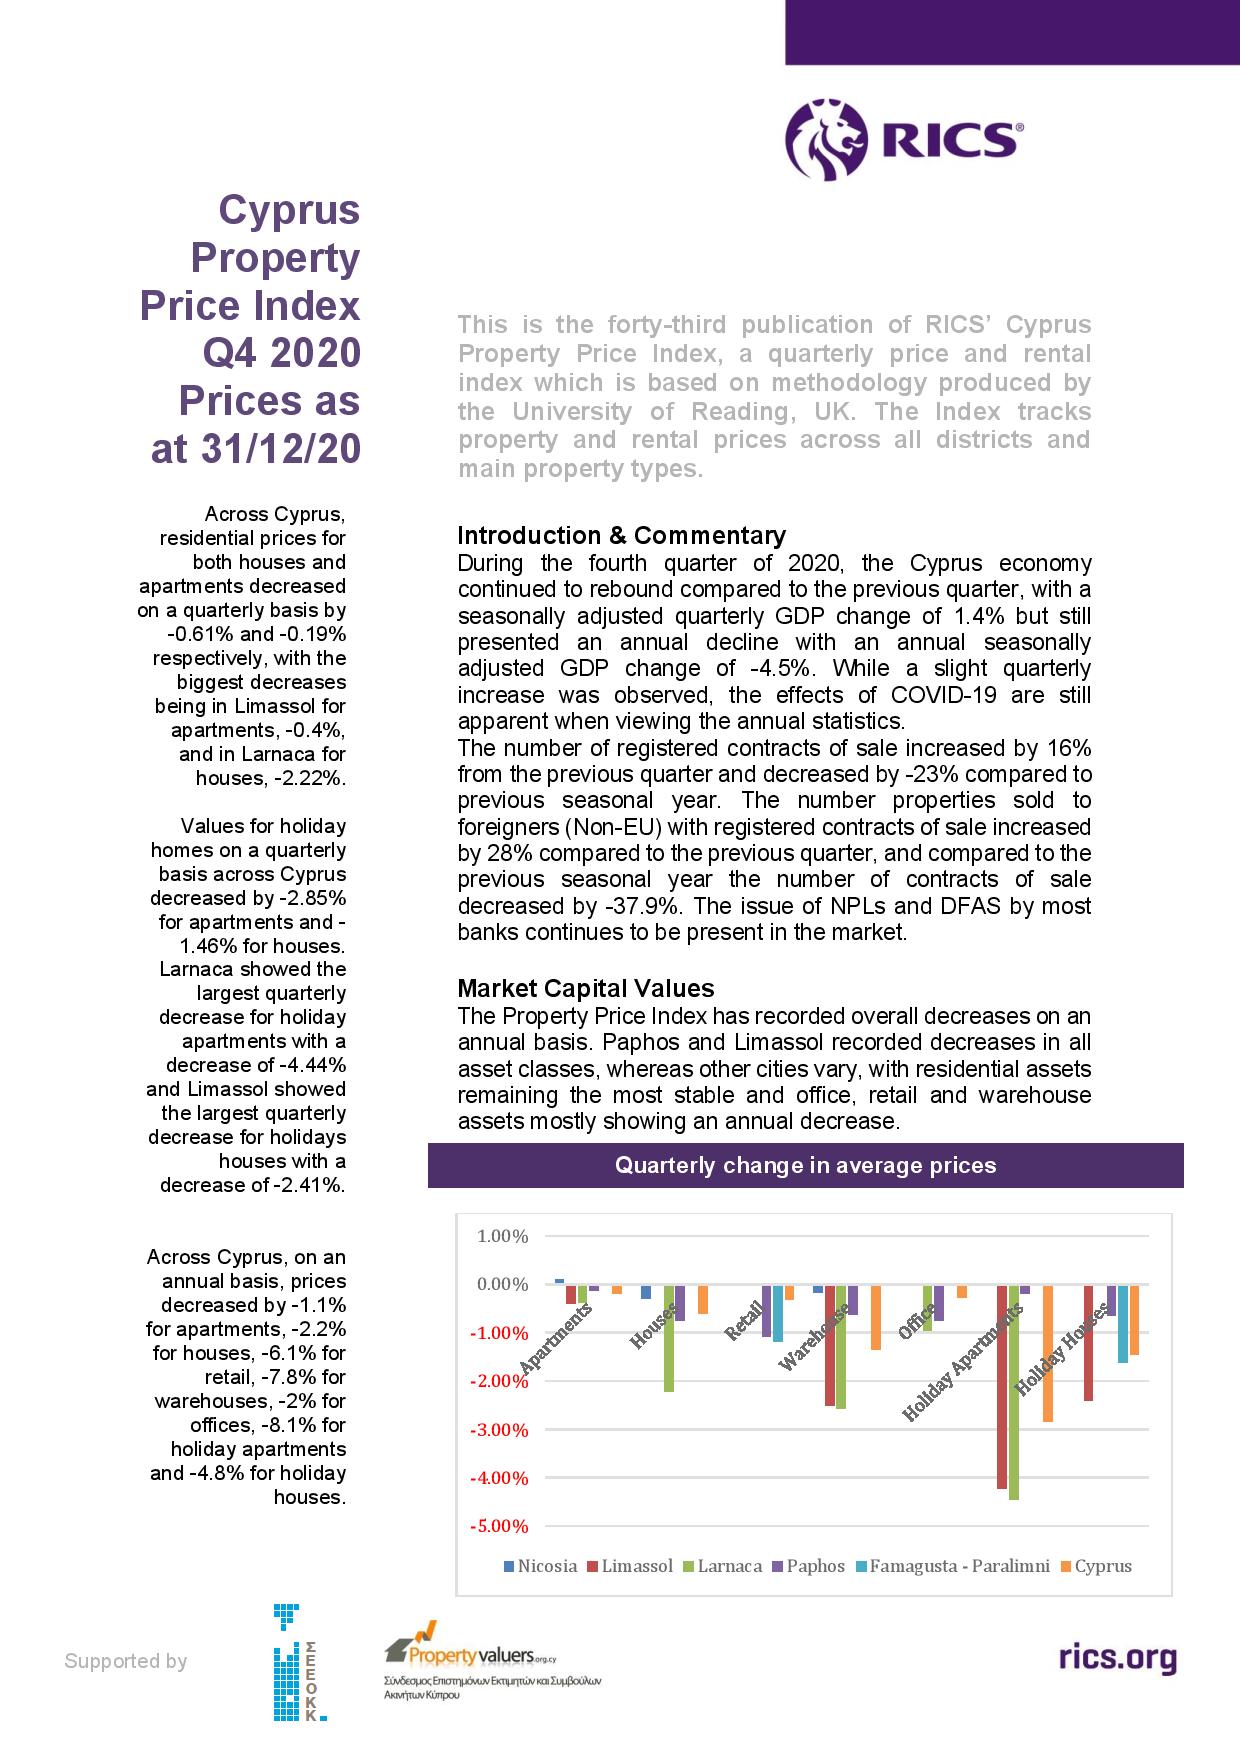 RICS: Cyprus Property Price Index Q4 2020 Prices as at 31/12/20